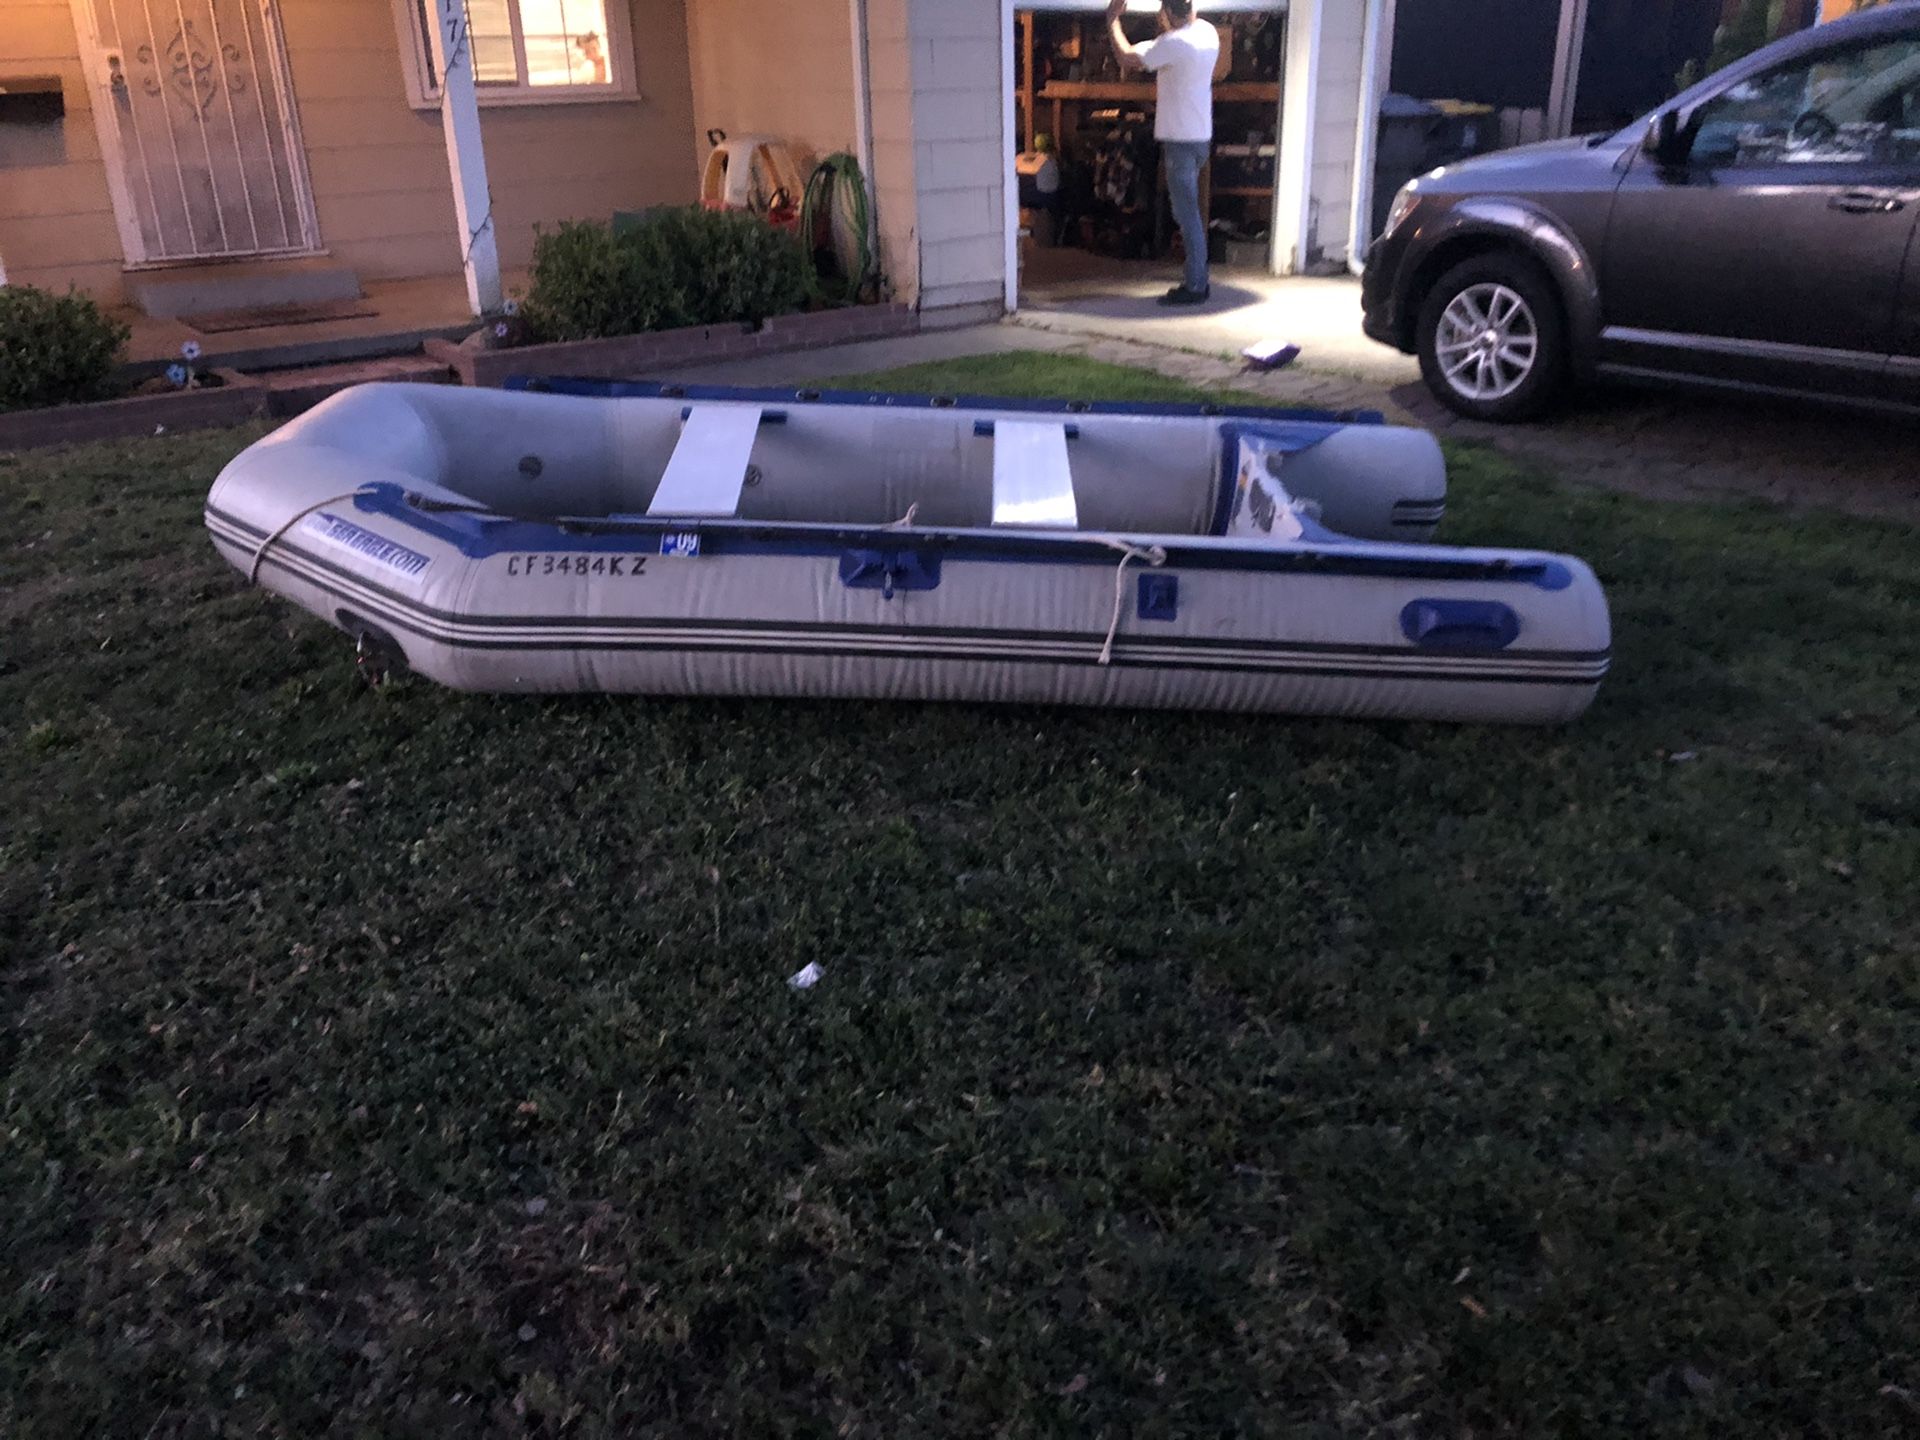 Boat 500$ OBO got tags an papers as well